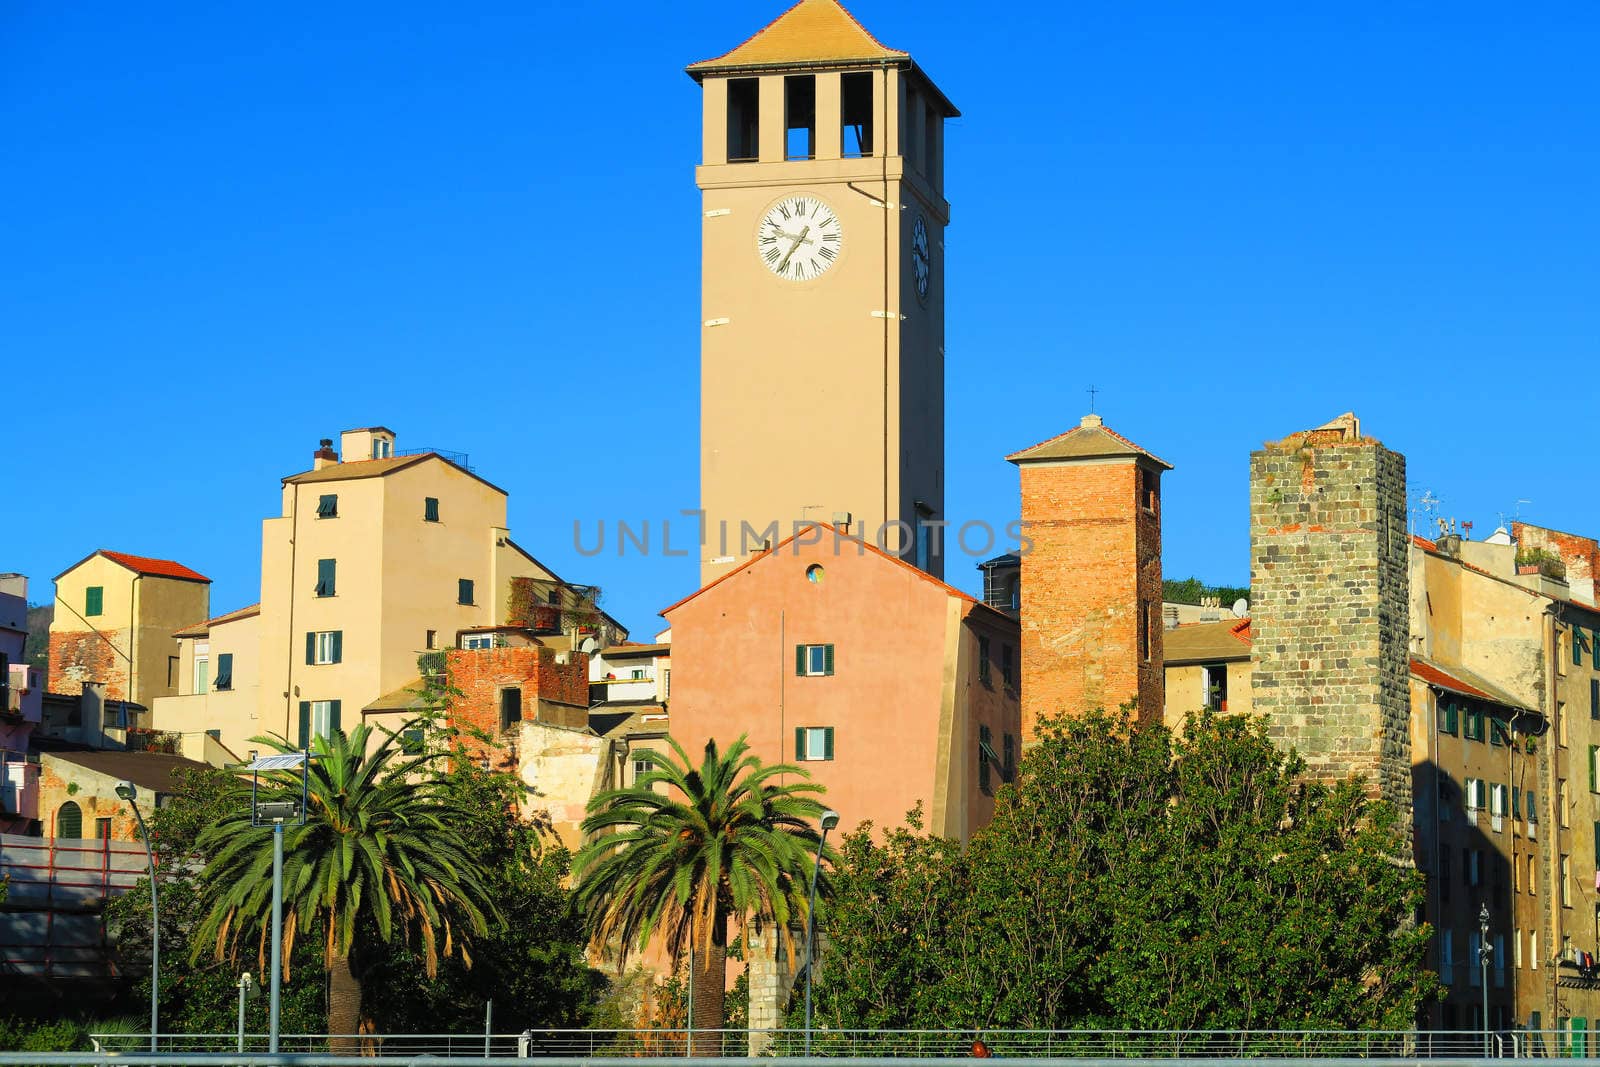 Glimpse of Savona, Italy, is visible in the center of the shot, the tower Brandale (XII century) flanked by other towers.